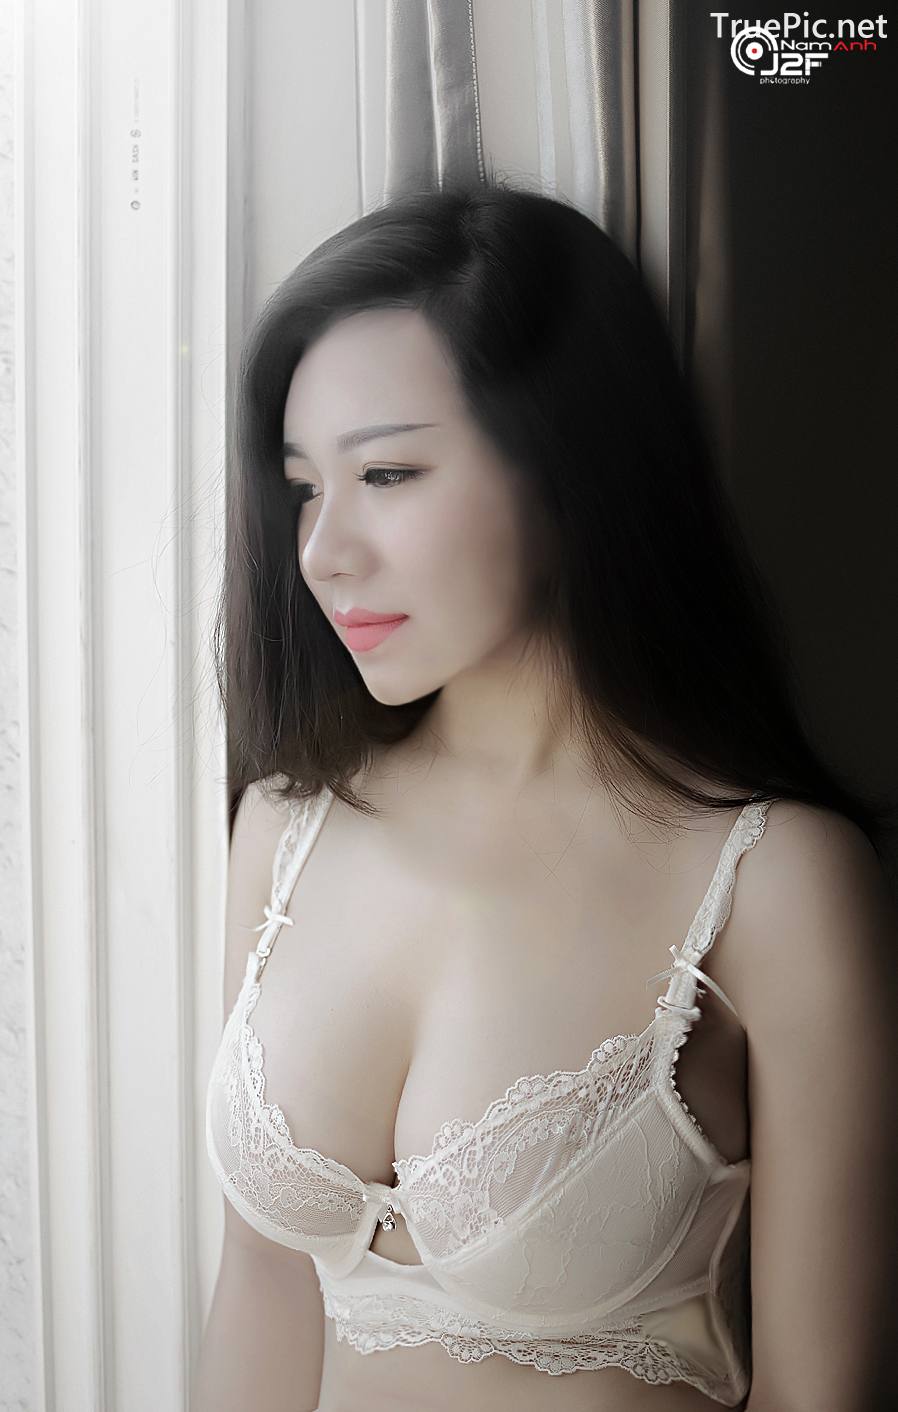 Image-Vietnamese-Model-Sexy-Beauty-of-Beautiful-Girls-Taken-by-NamAnh-Photography-2-TruePic.net- Picture-63